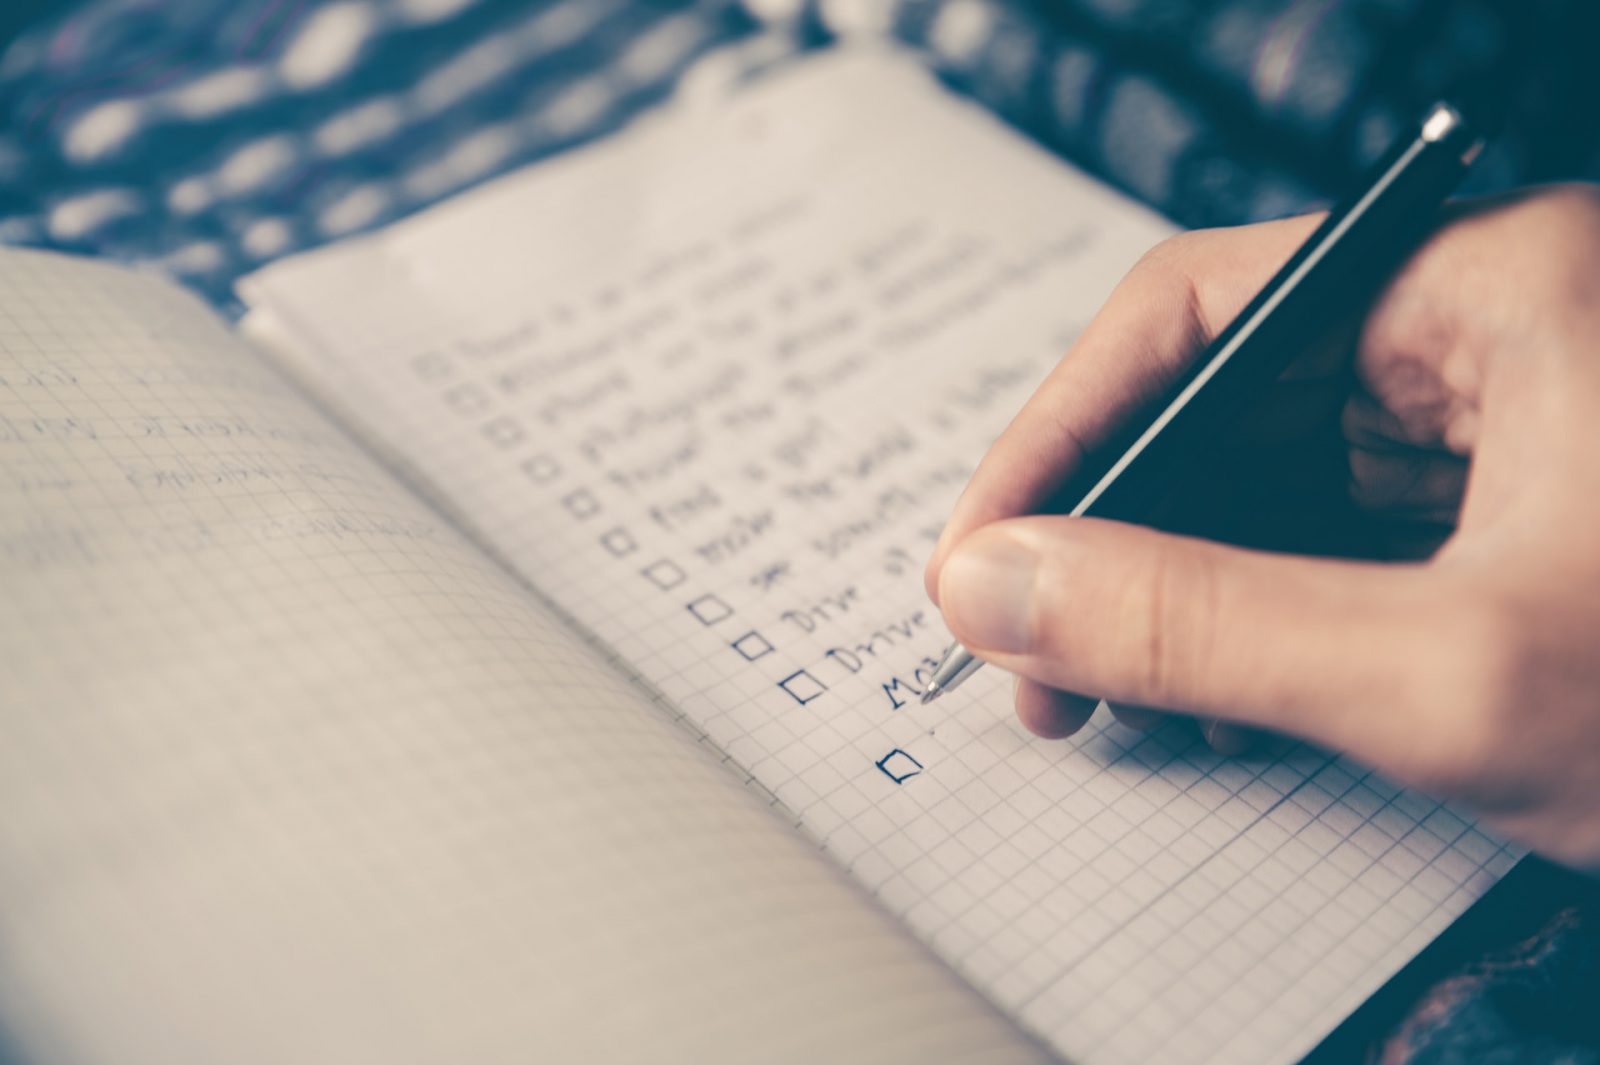 Real estate time management means focusing on critical tasks on your to-do lists 